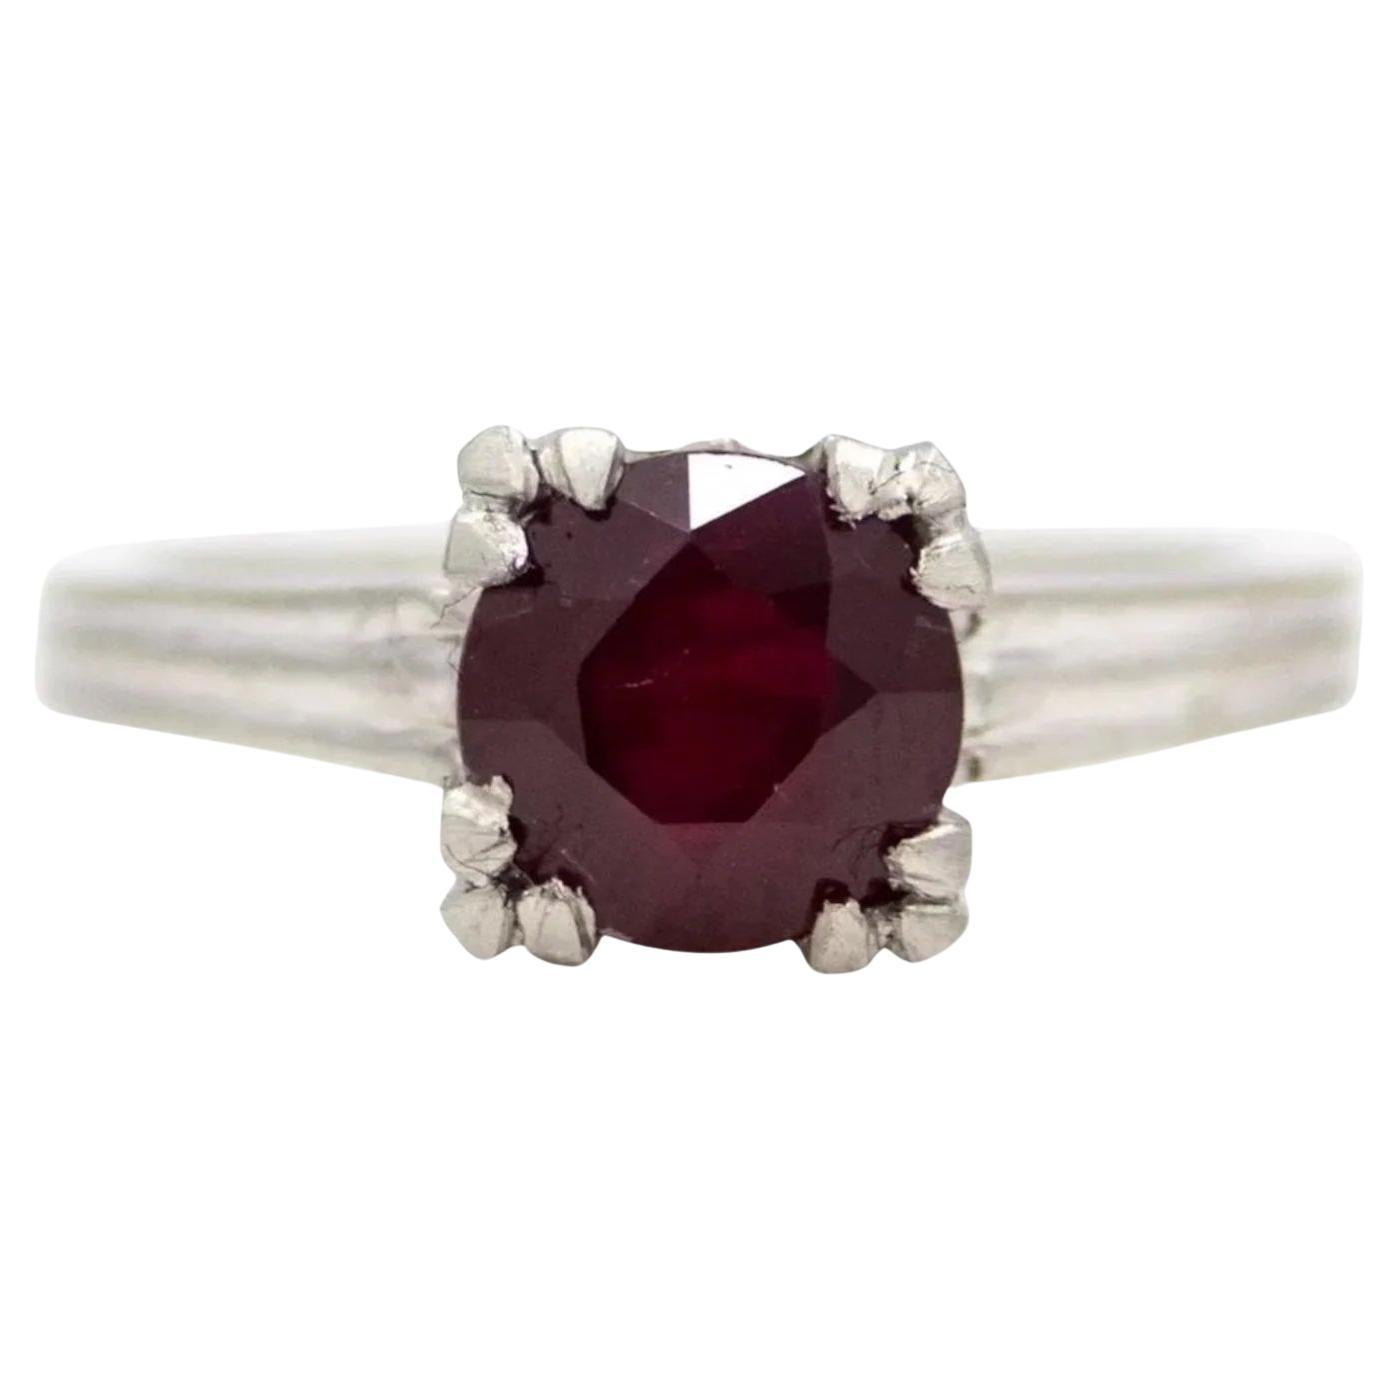  1920's Art Deco 1.43ct Ruby Solitaire Ring in Platinum